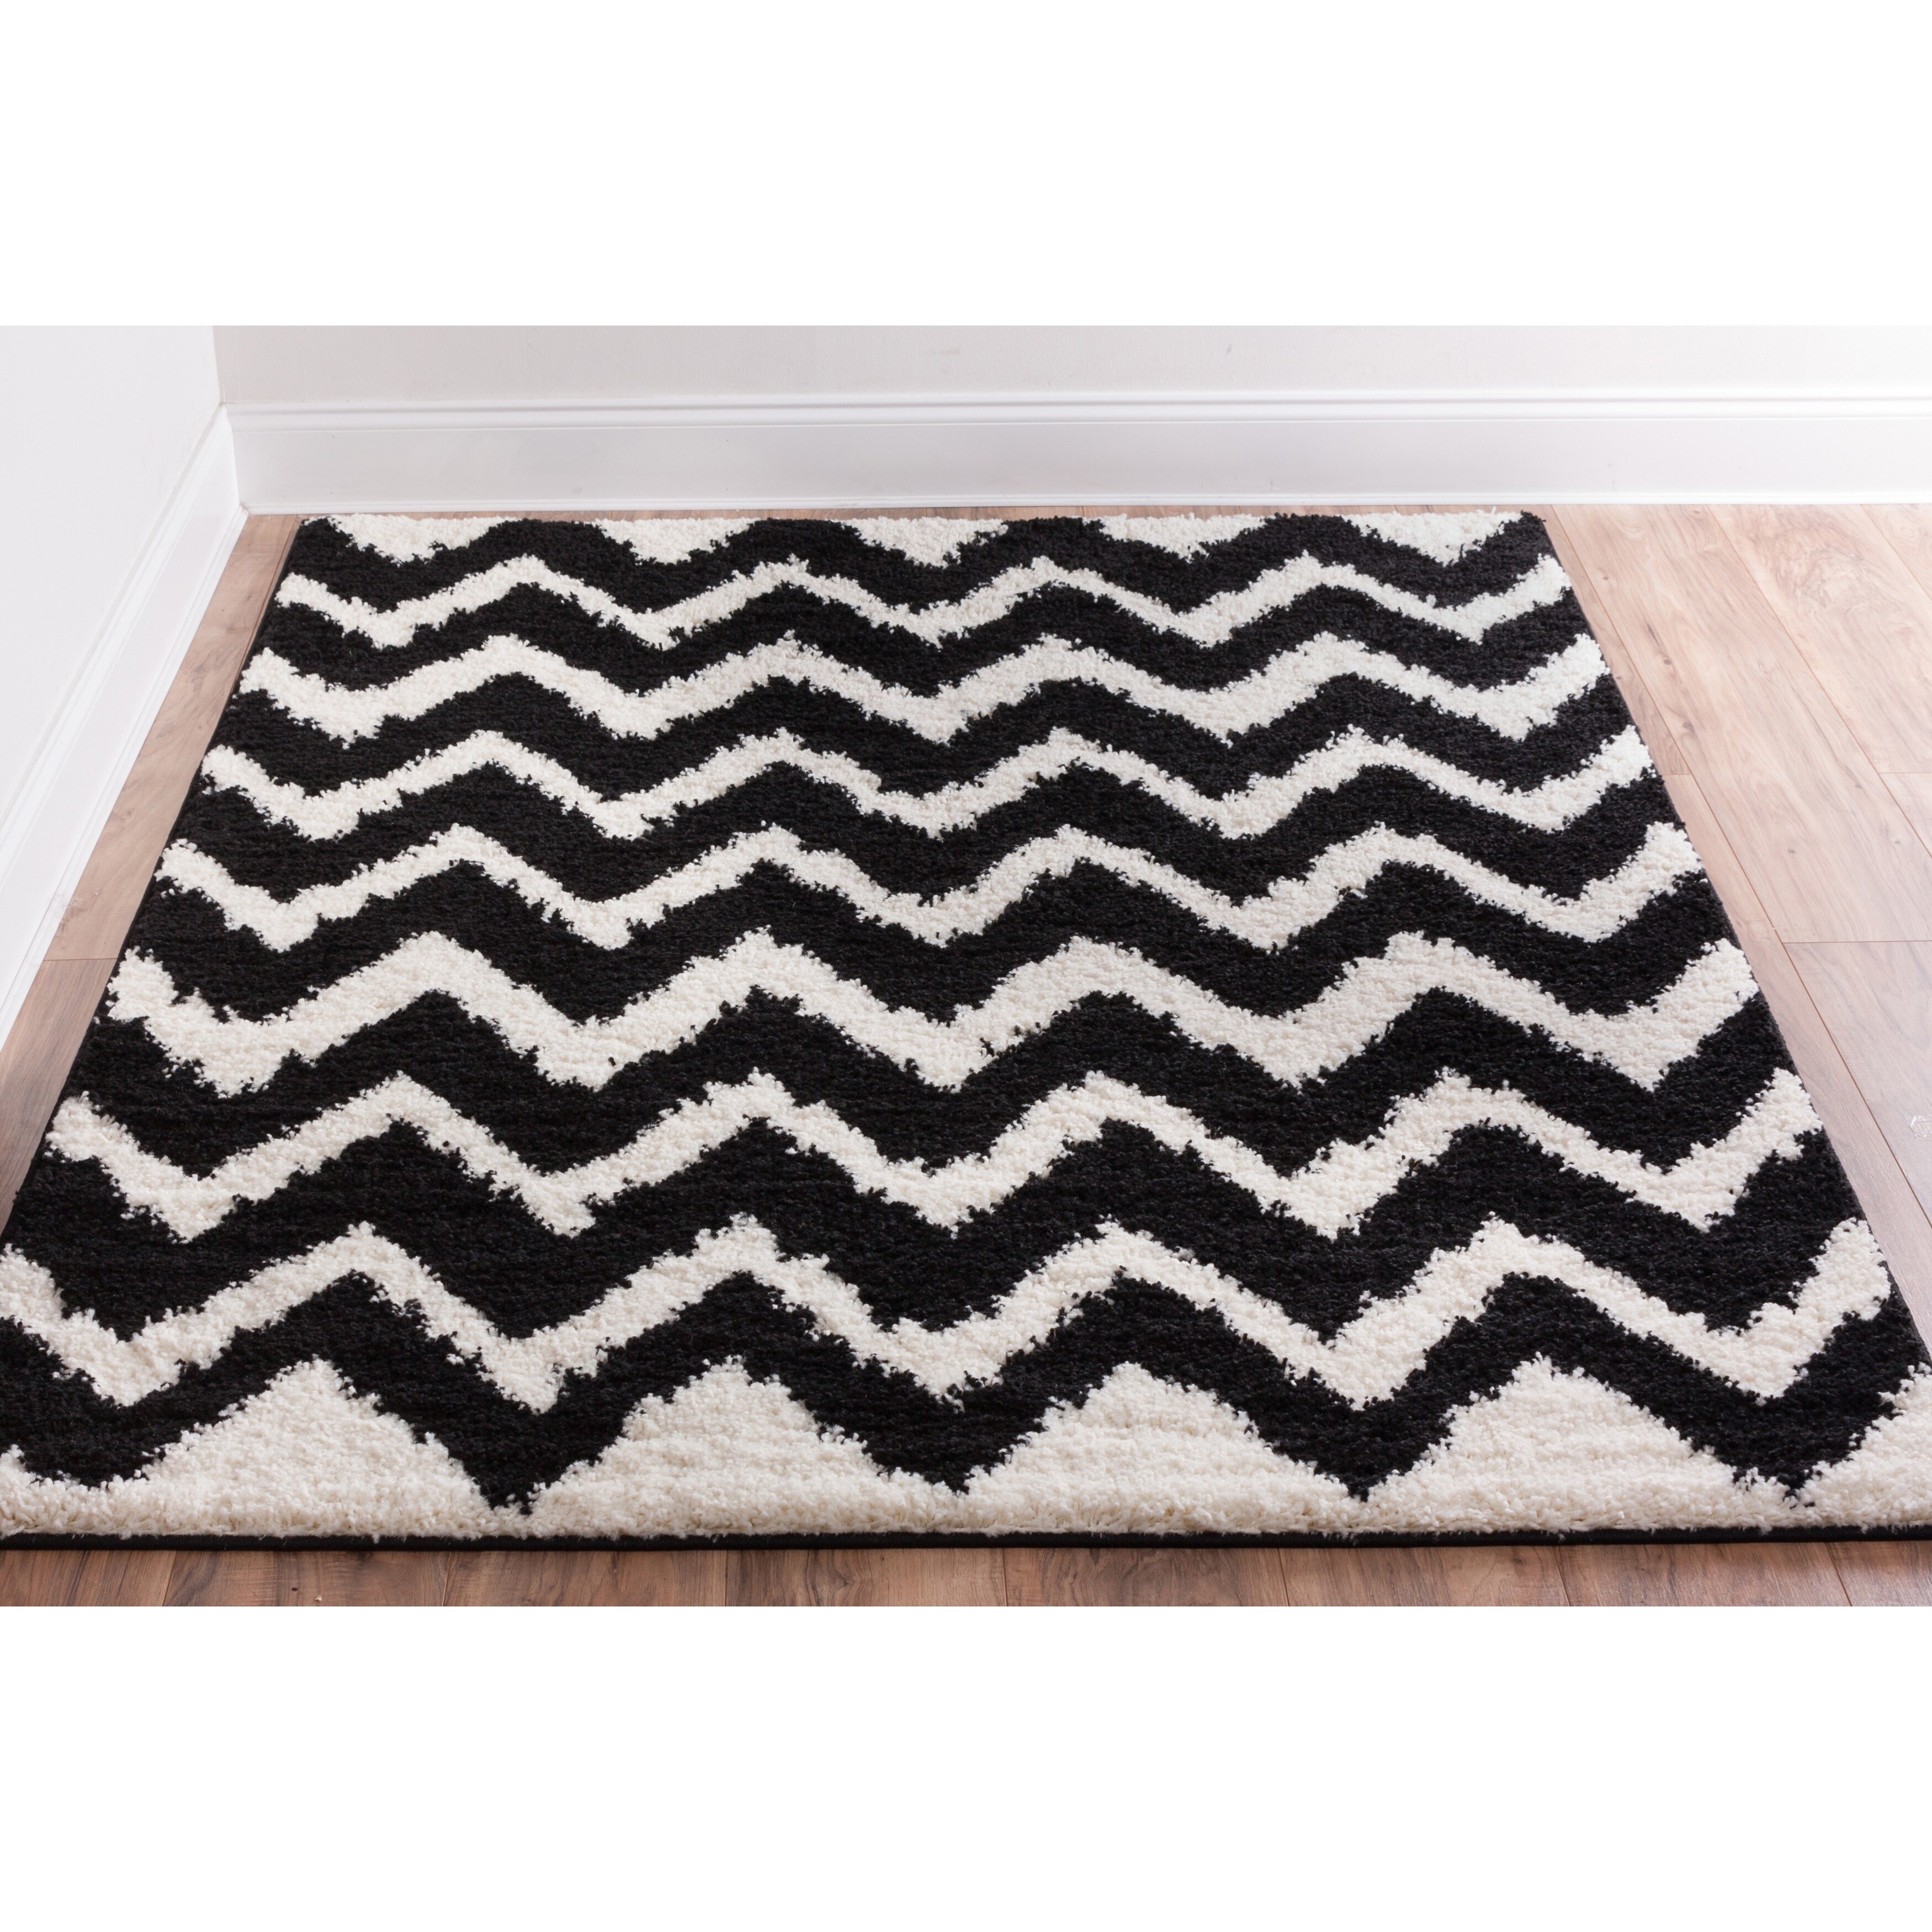 Featured image of post Black And White Chevron Doormat : 1609 x 2048 jpeg 519 кб.